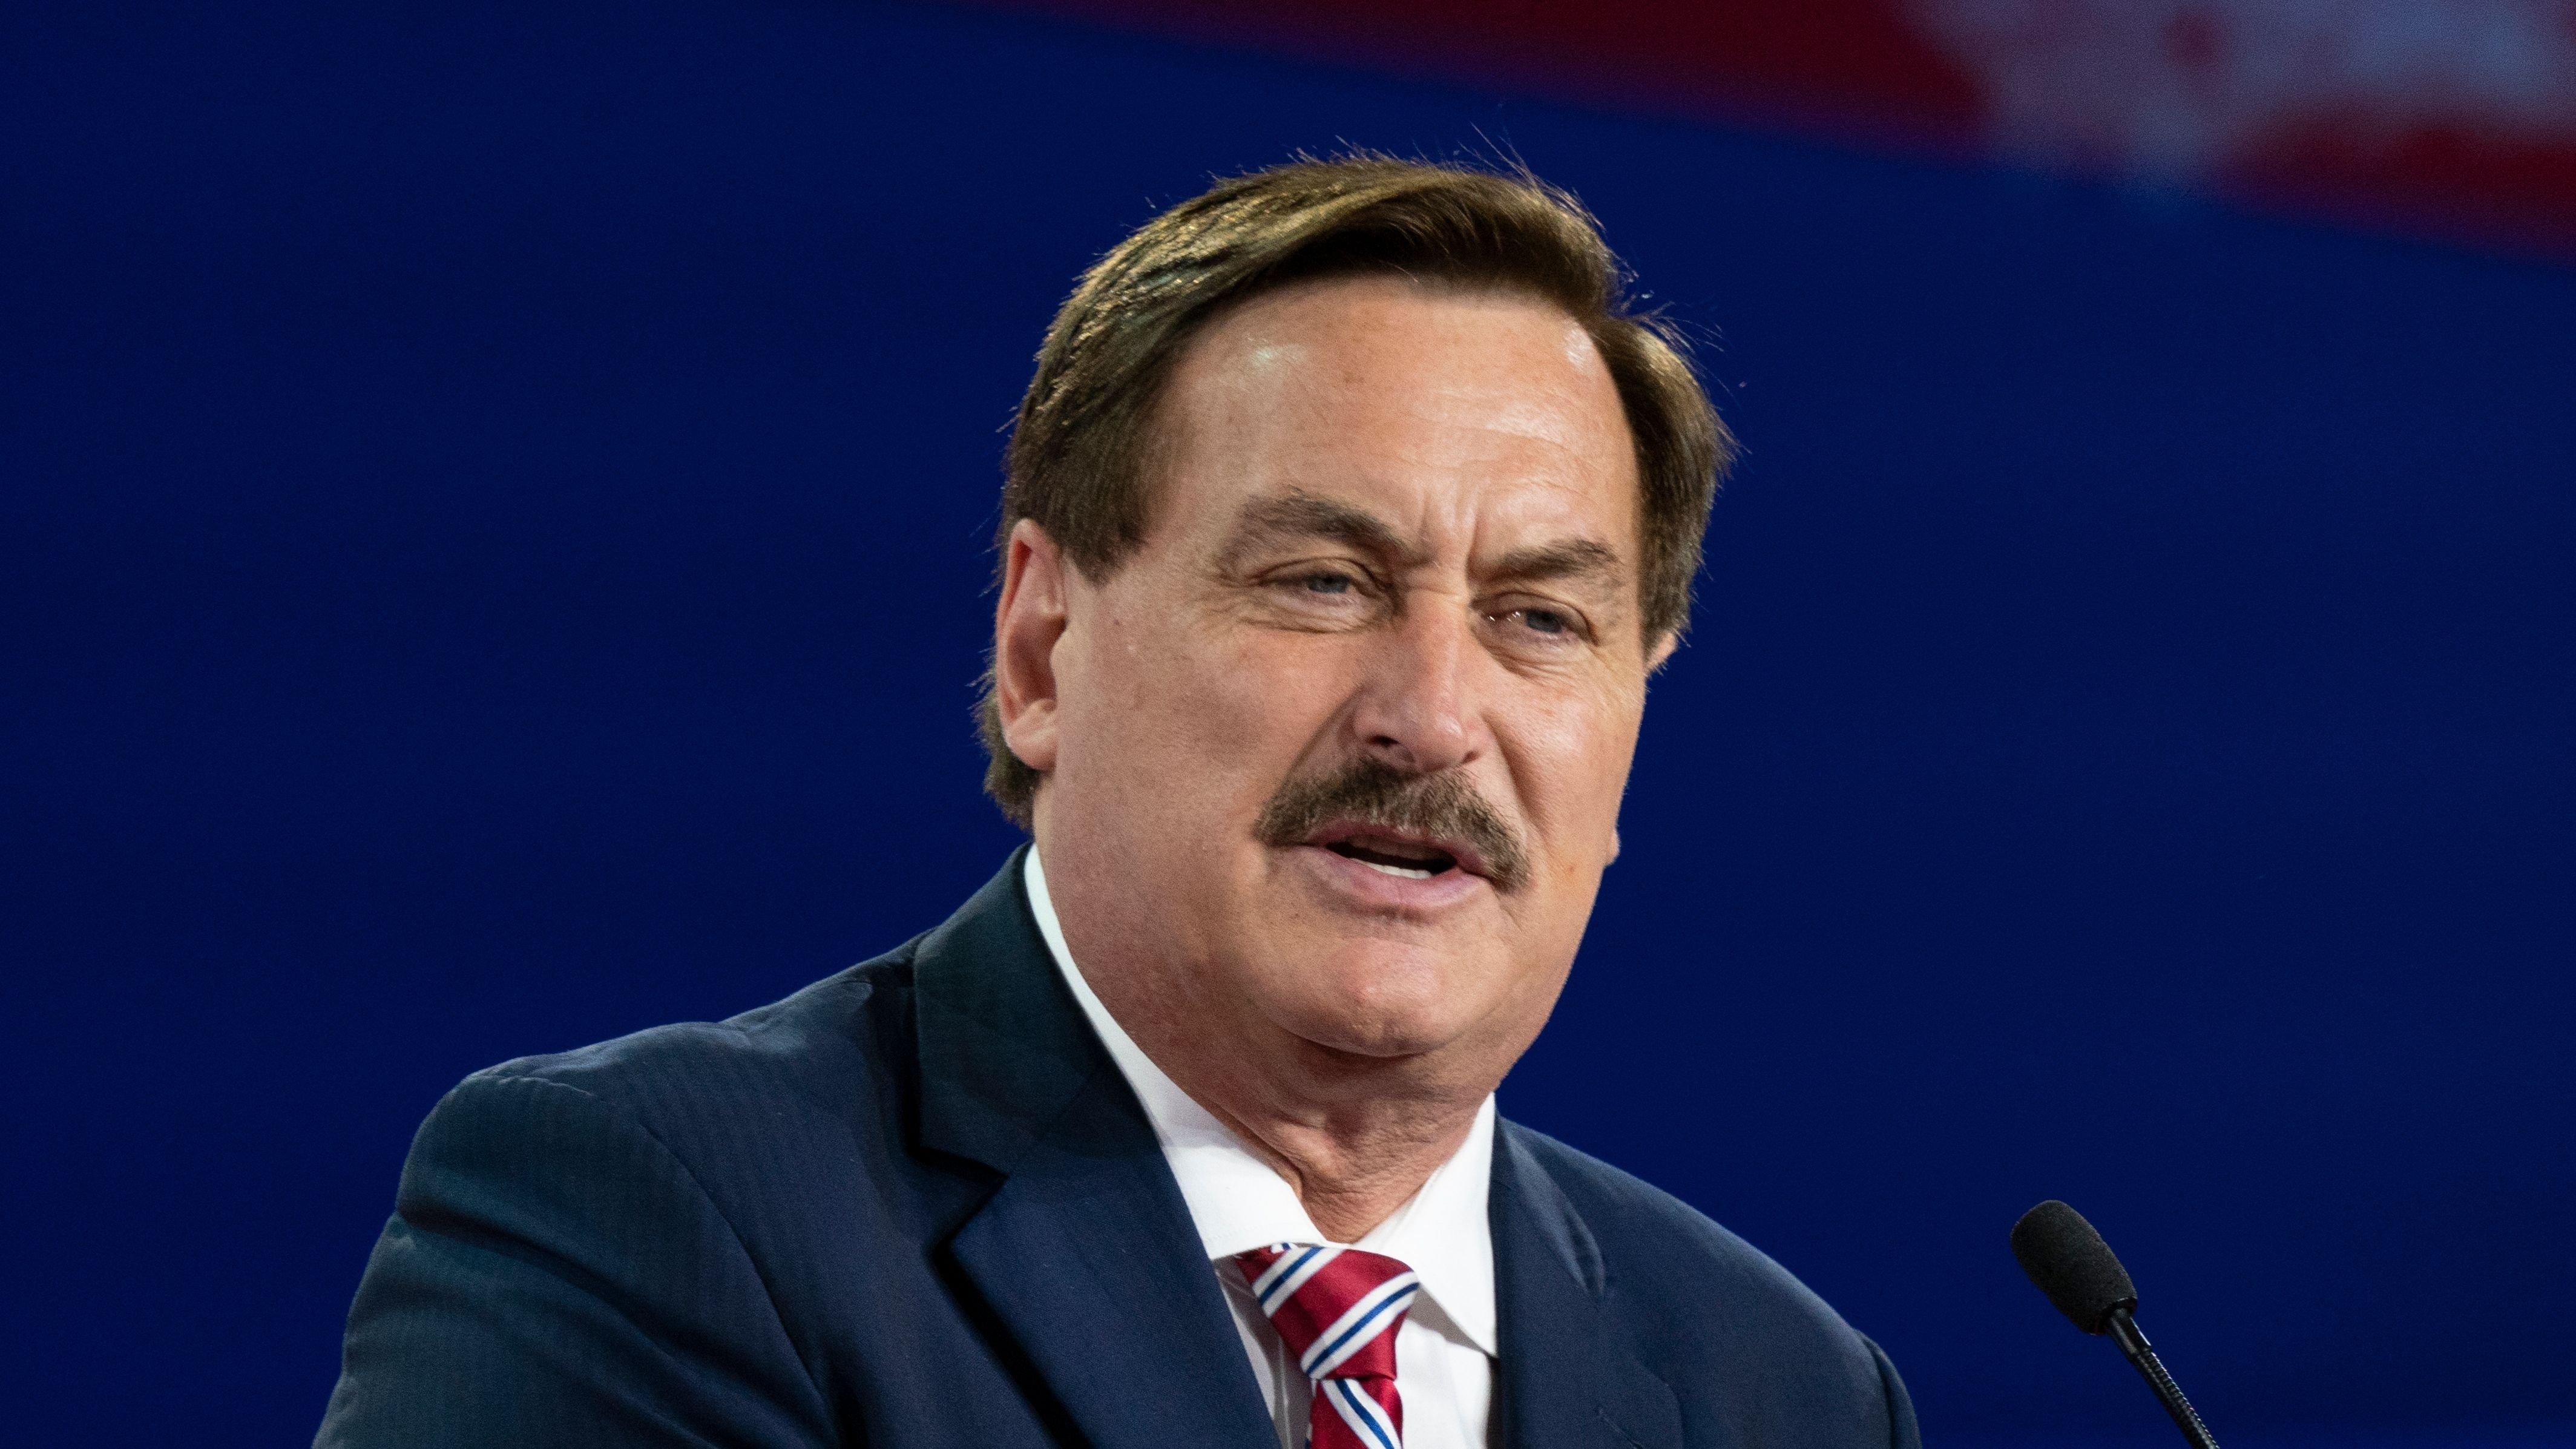 MyPillow CEO Mike Lindell delivers remarks